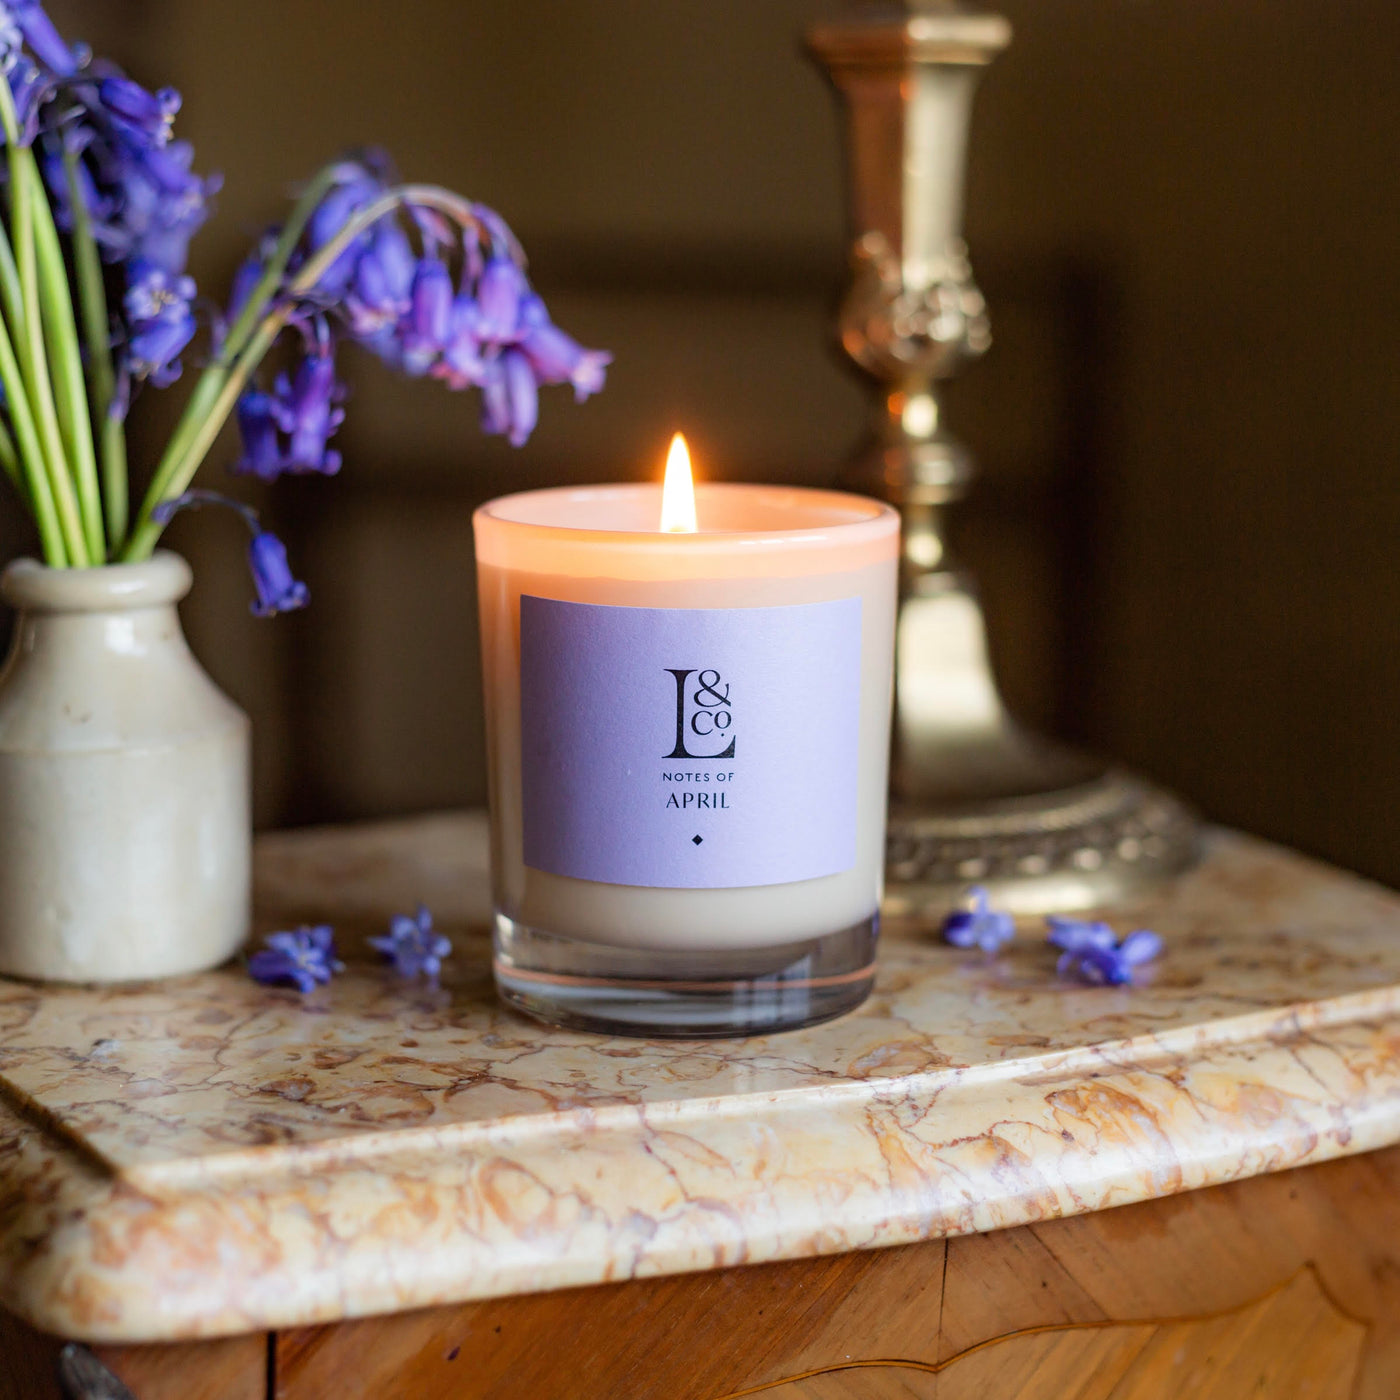 Bluebell home fragrance. Luxury scented candles hand-poured in England. Sustainable, vegan, natural wax